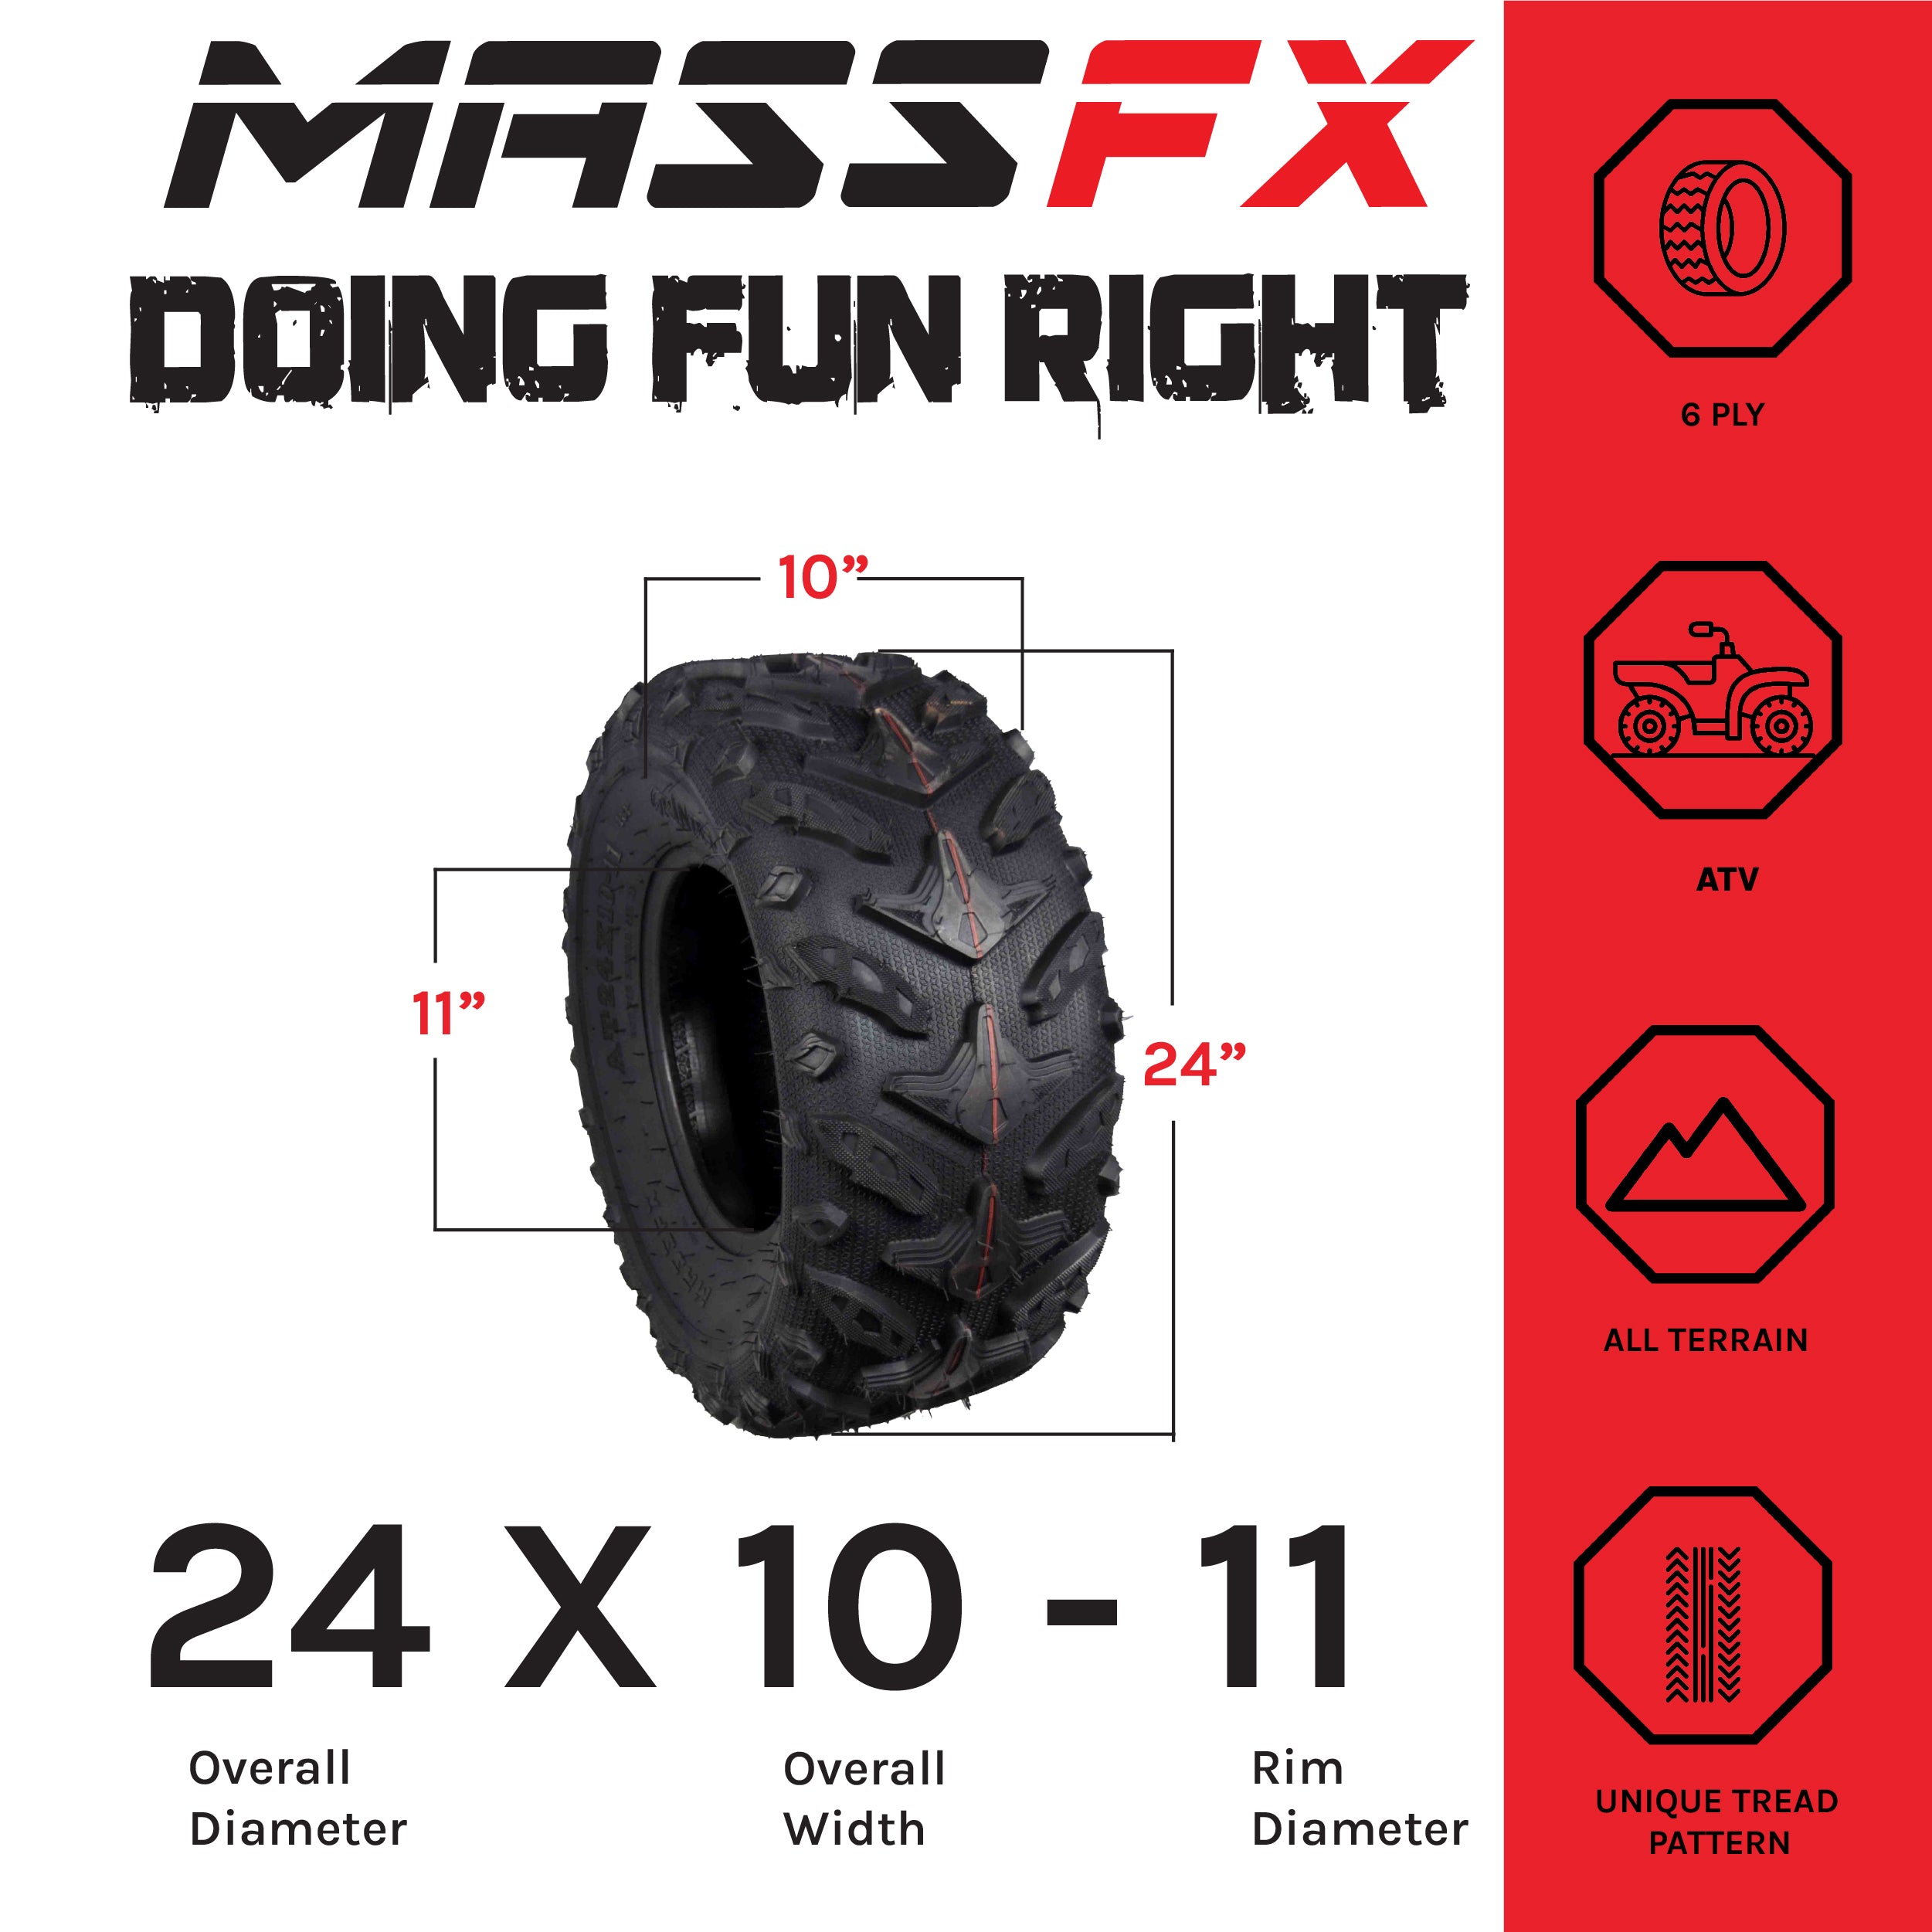 MASSFX Grinder 24x10-11 Rear ATV Tire 6 Ply for Soft/Hard Pack Ground